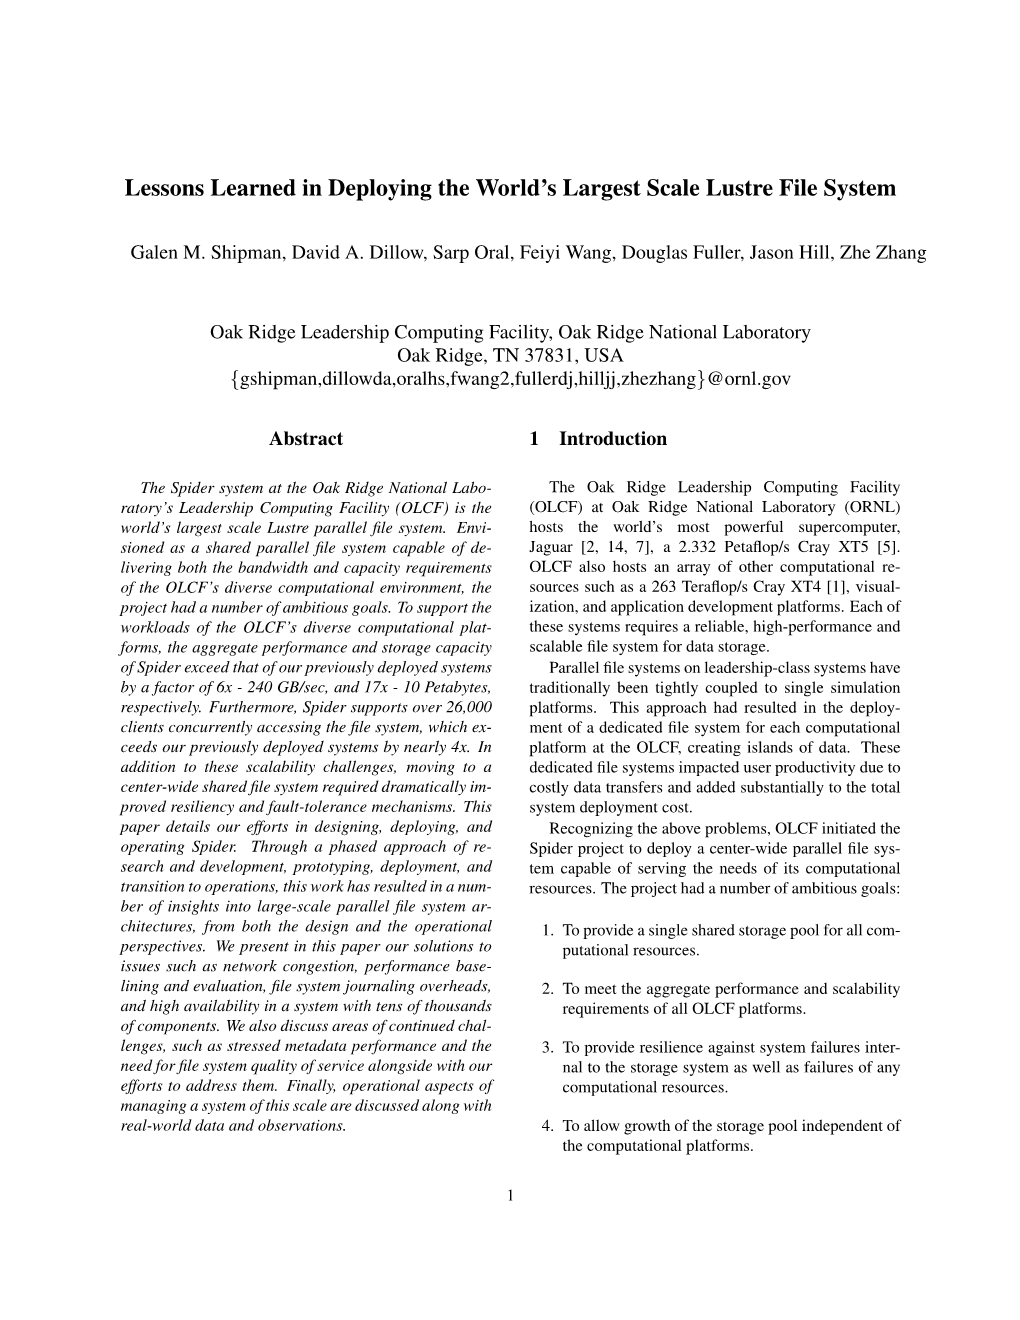 Lessons Learned in Deploying the World's Largest Scale Lustre File